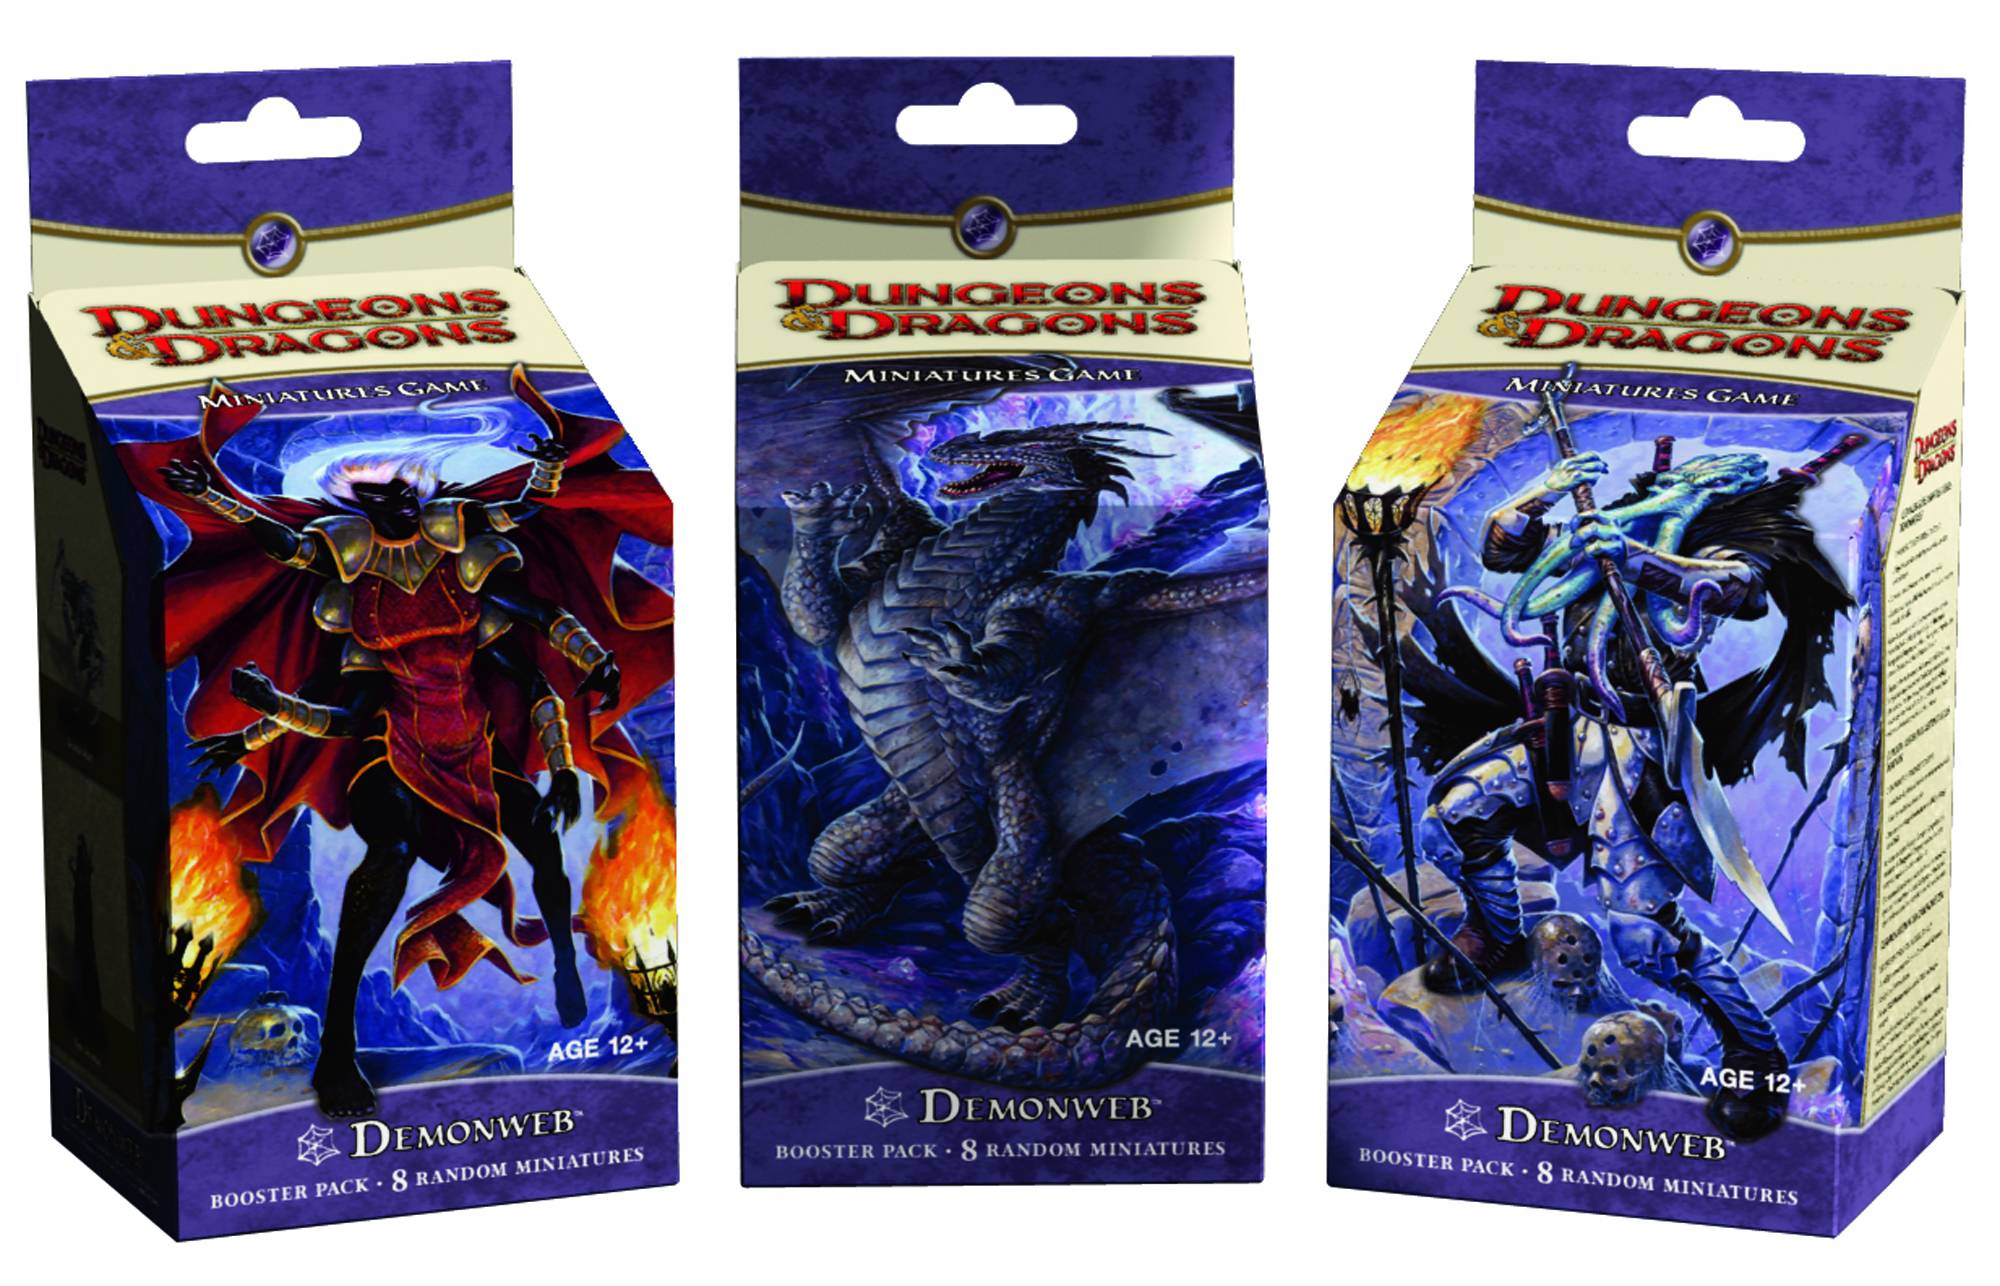 DUNGEONS & DRAGONS MINATURES DEMONWEB BOOSTER PACK